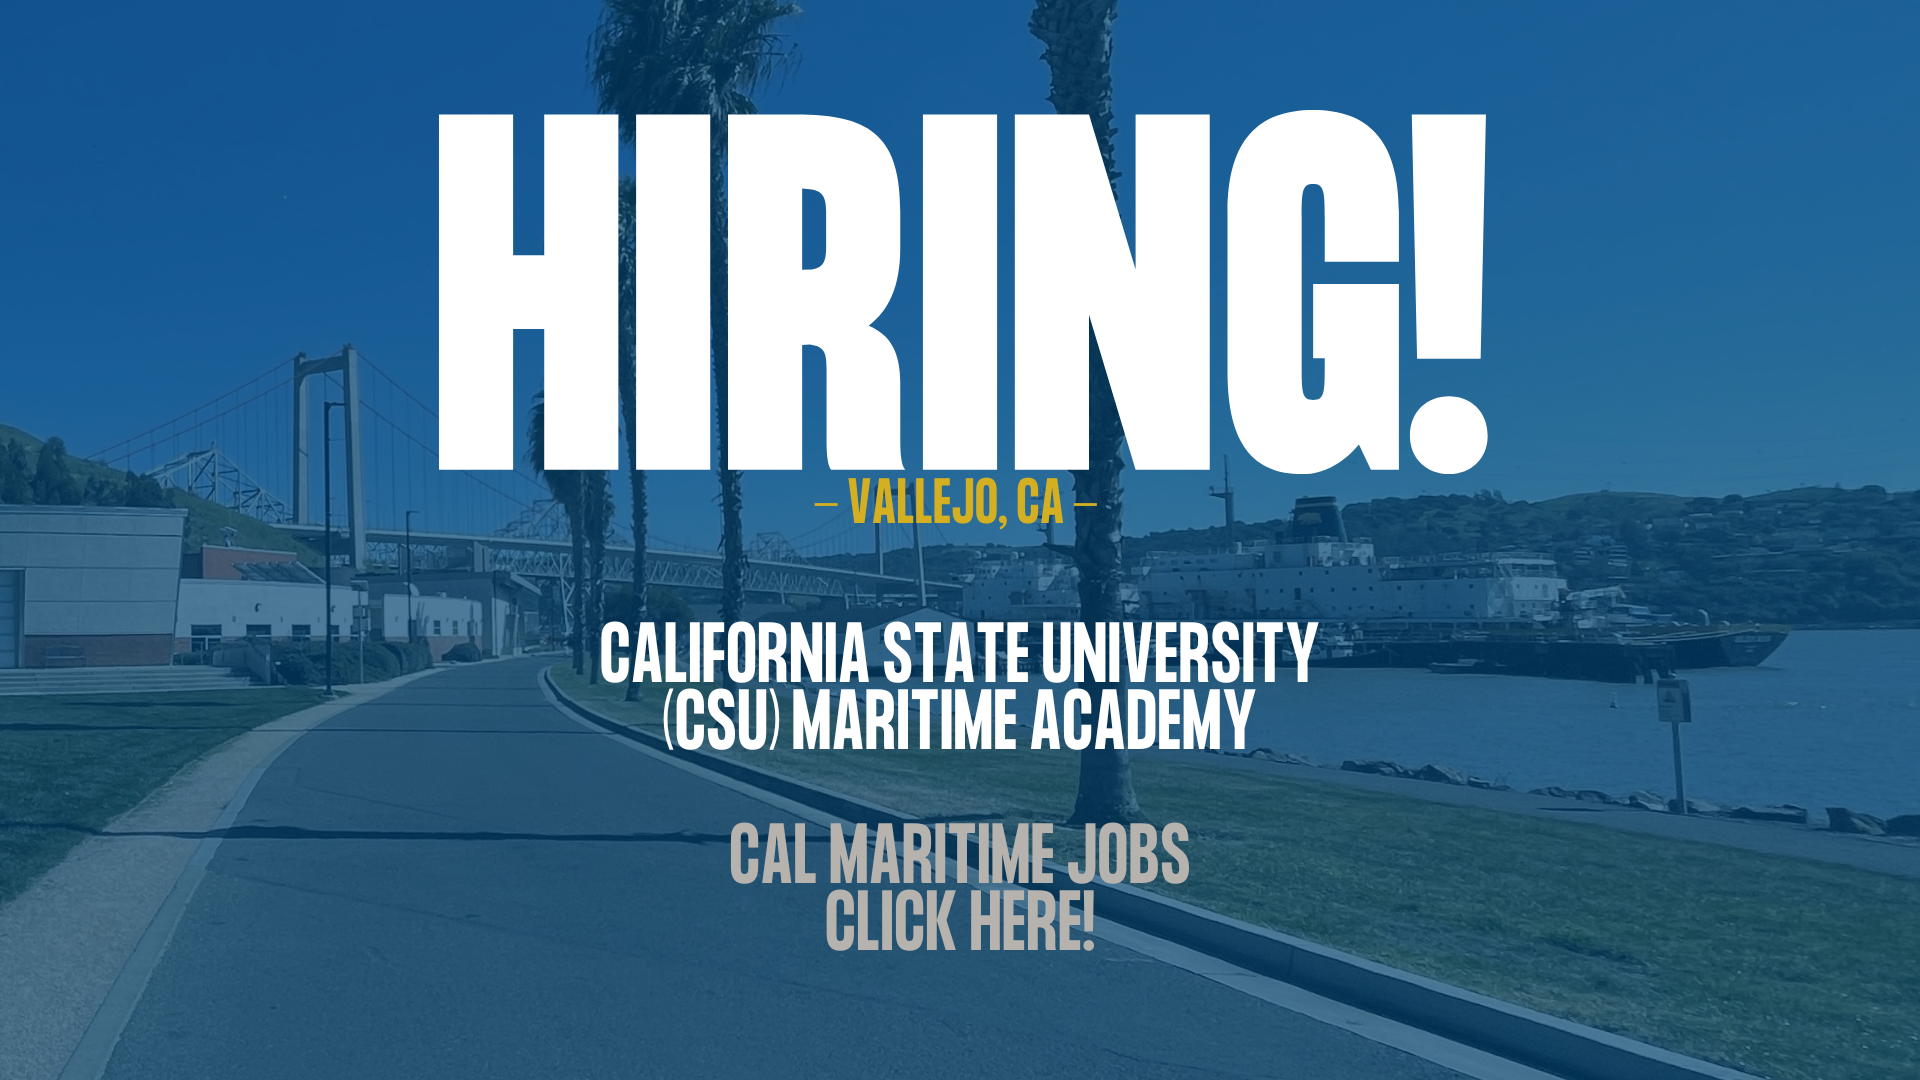 CSU Maritime Academy is hiring! Interested? Learn more and click here